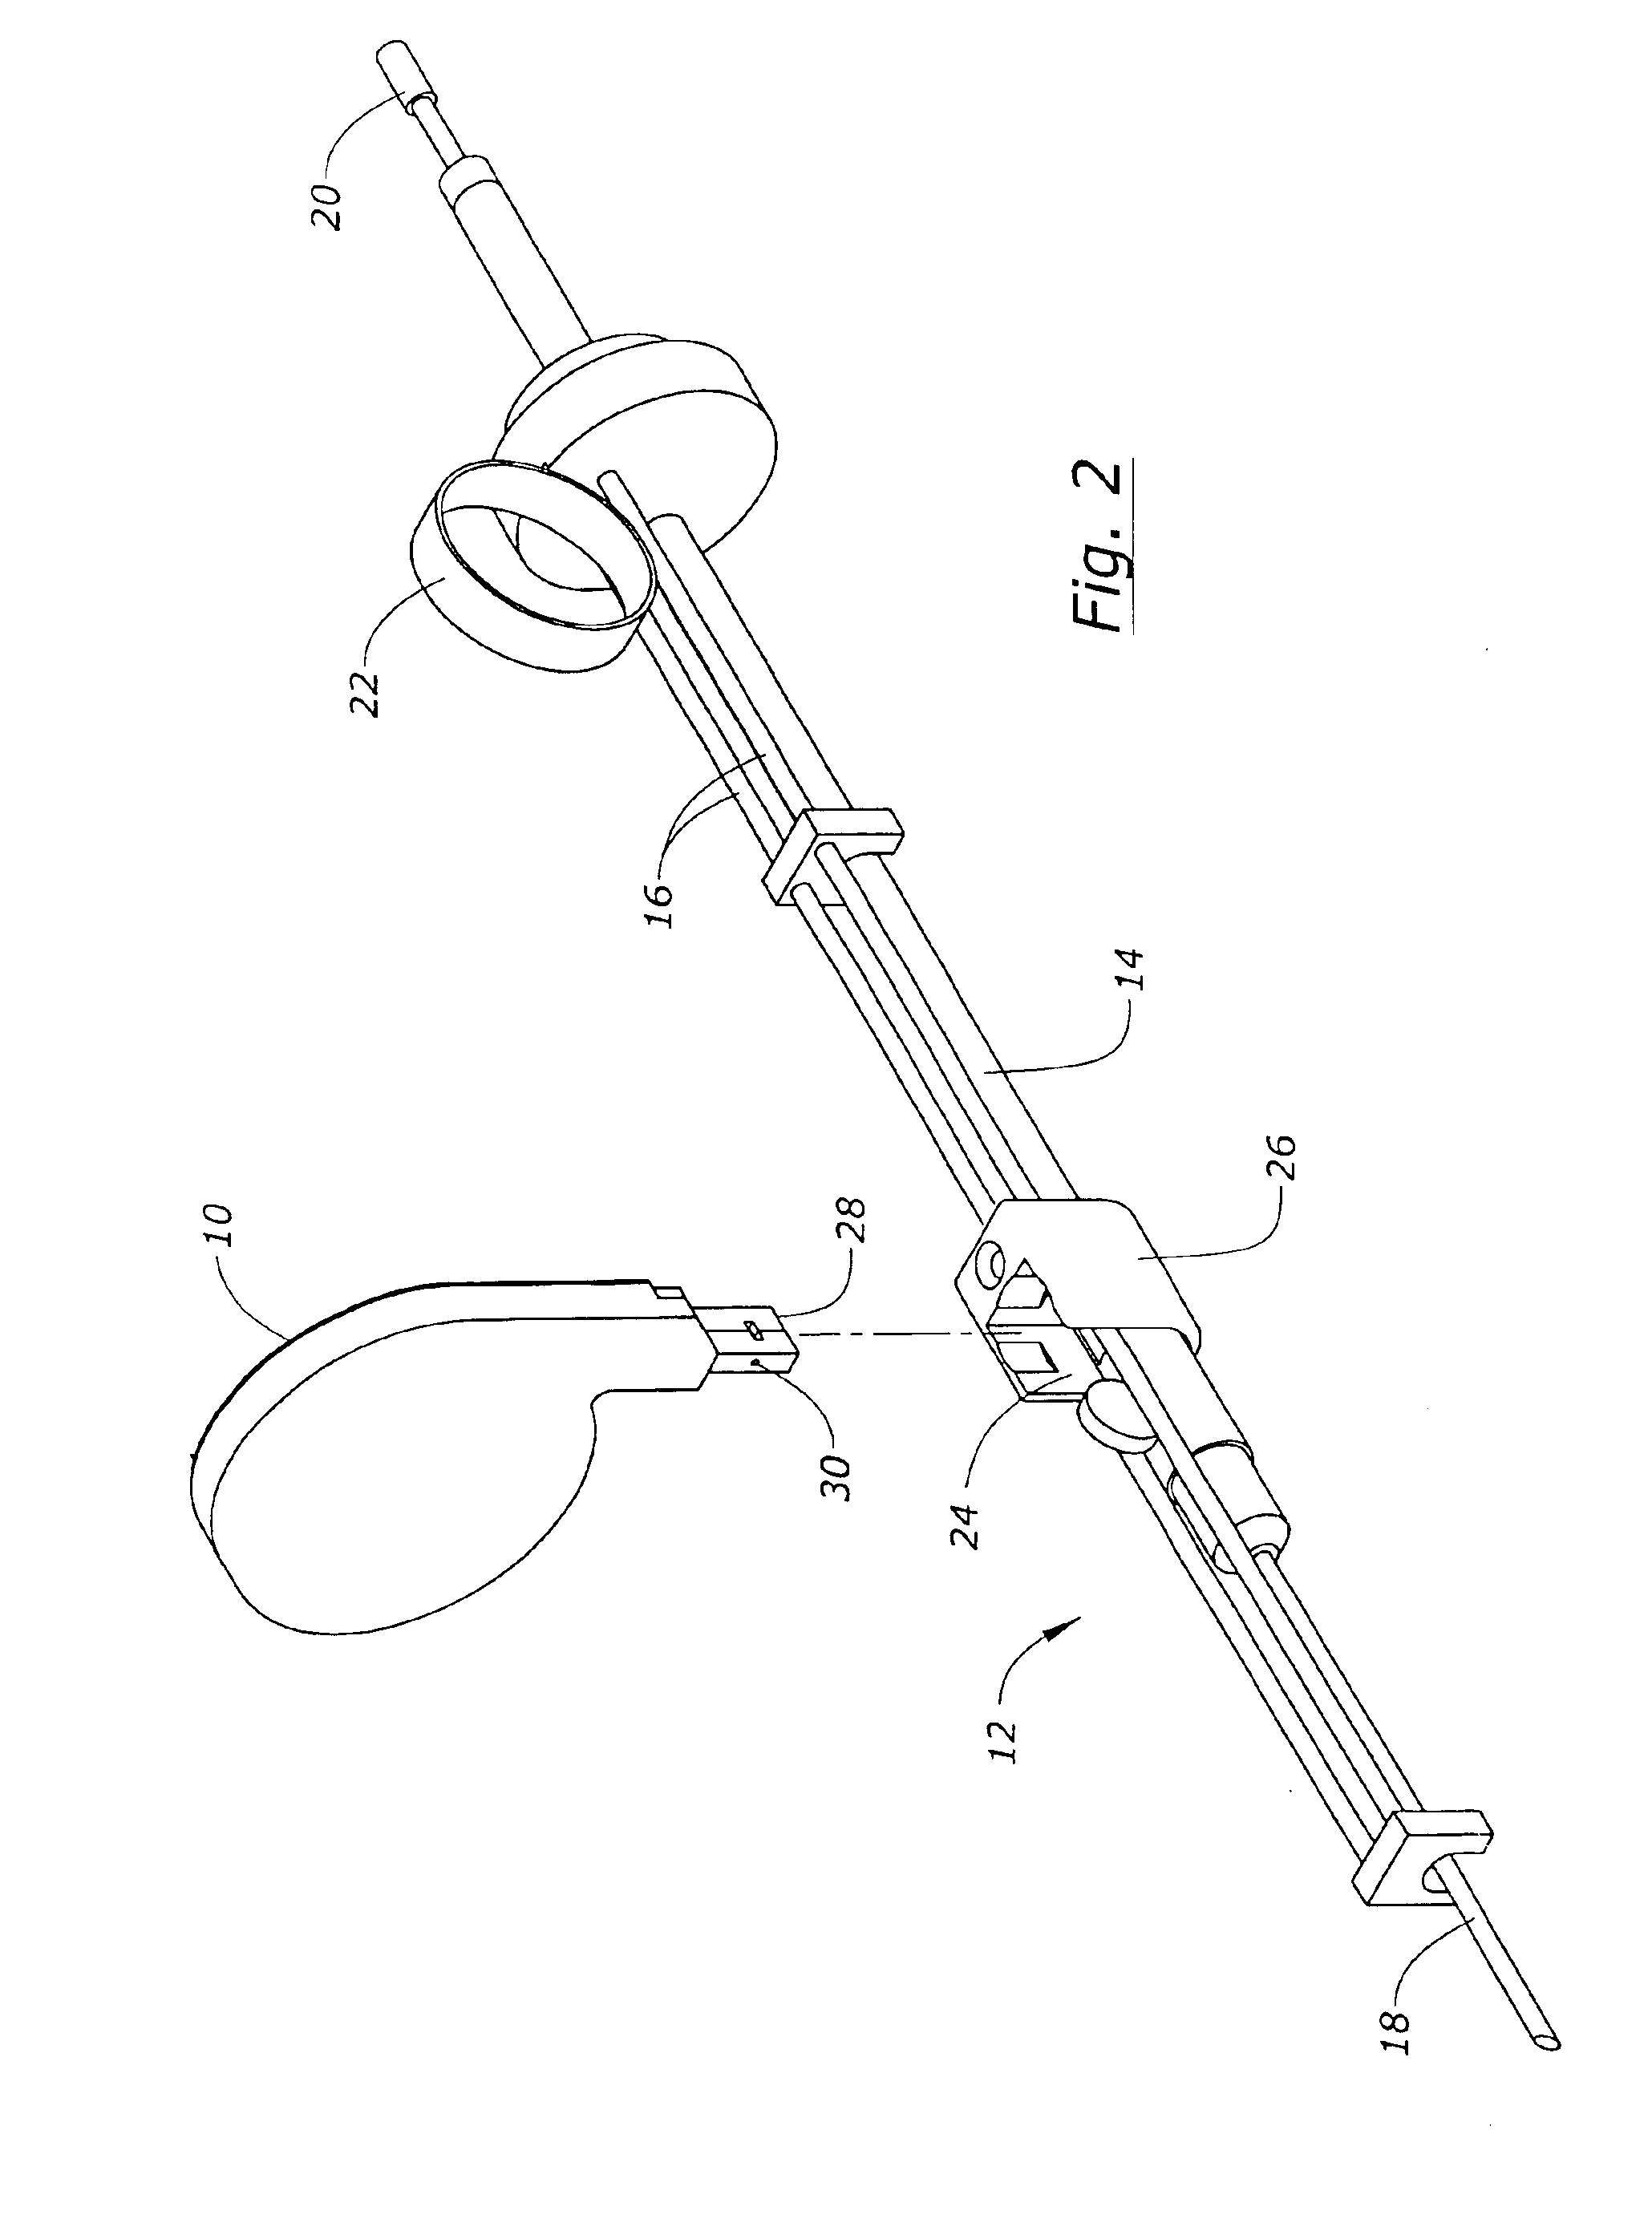 Seed cartridge for radiation therapy